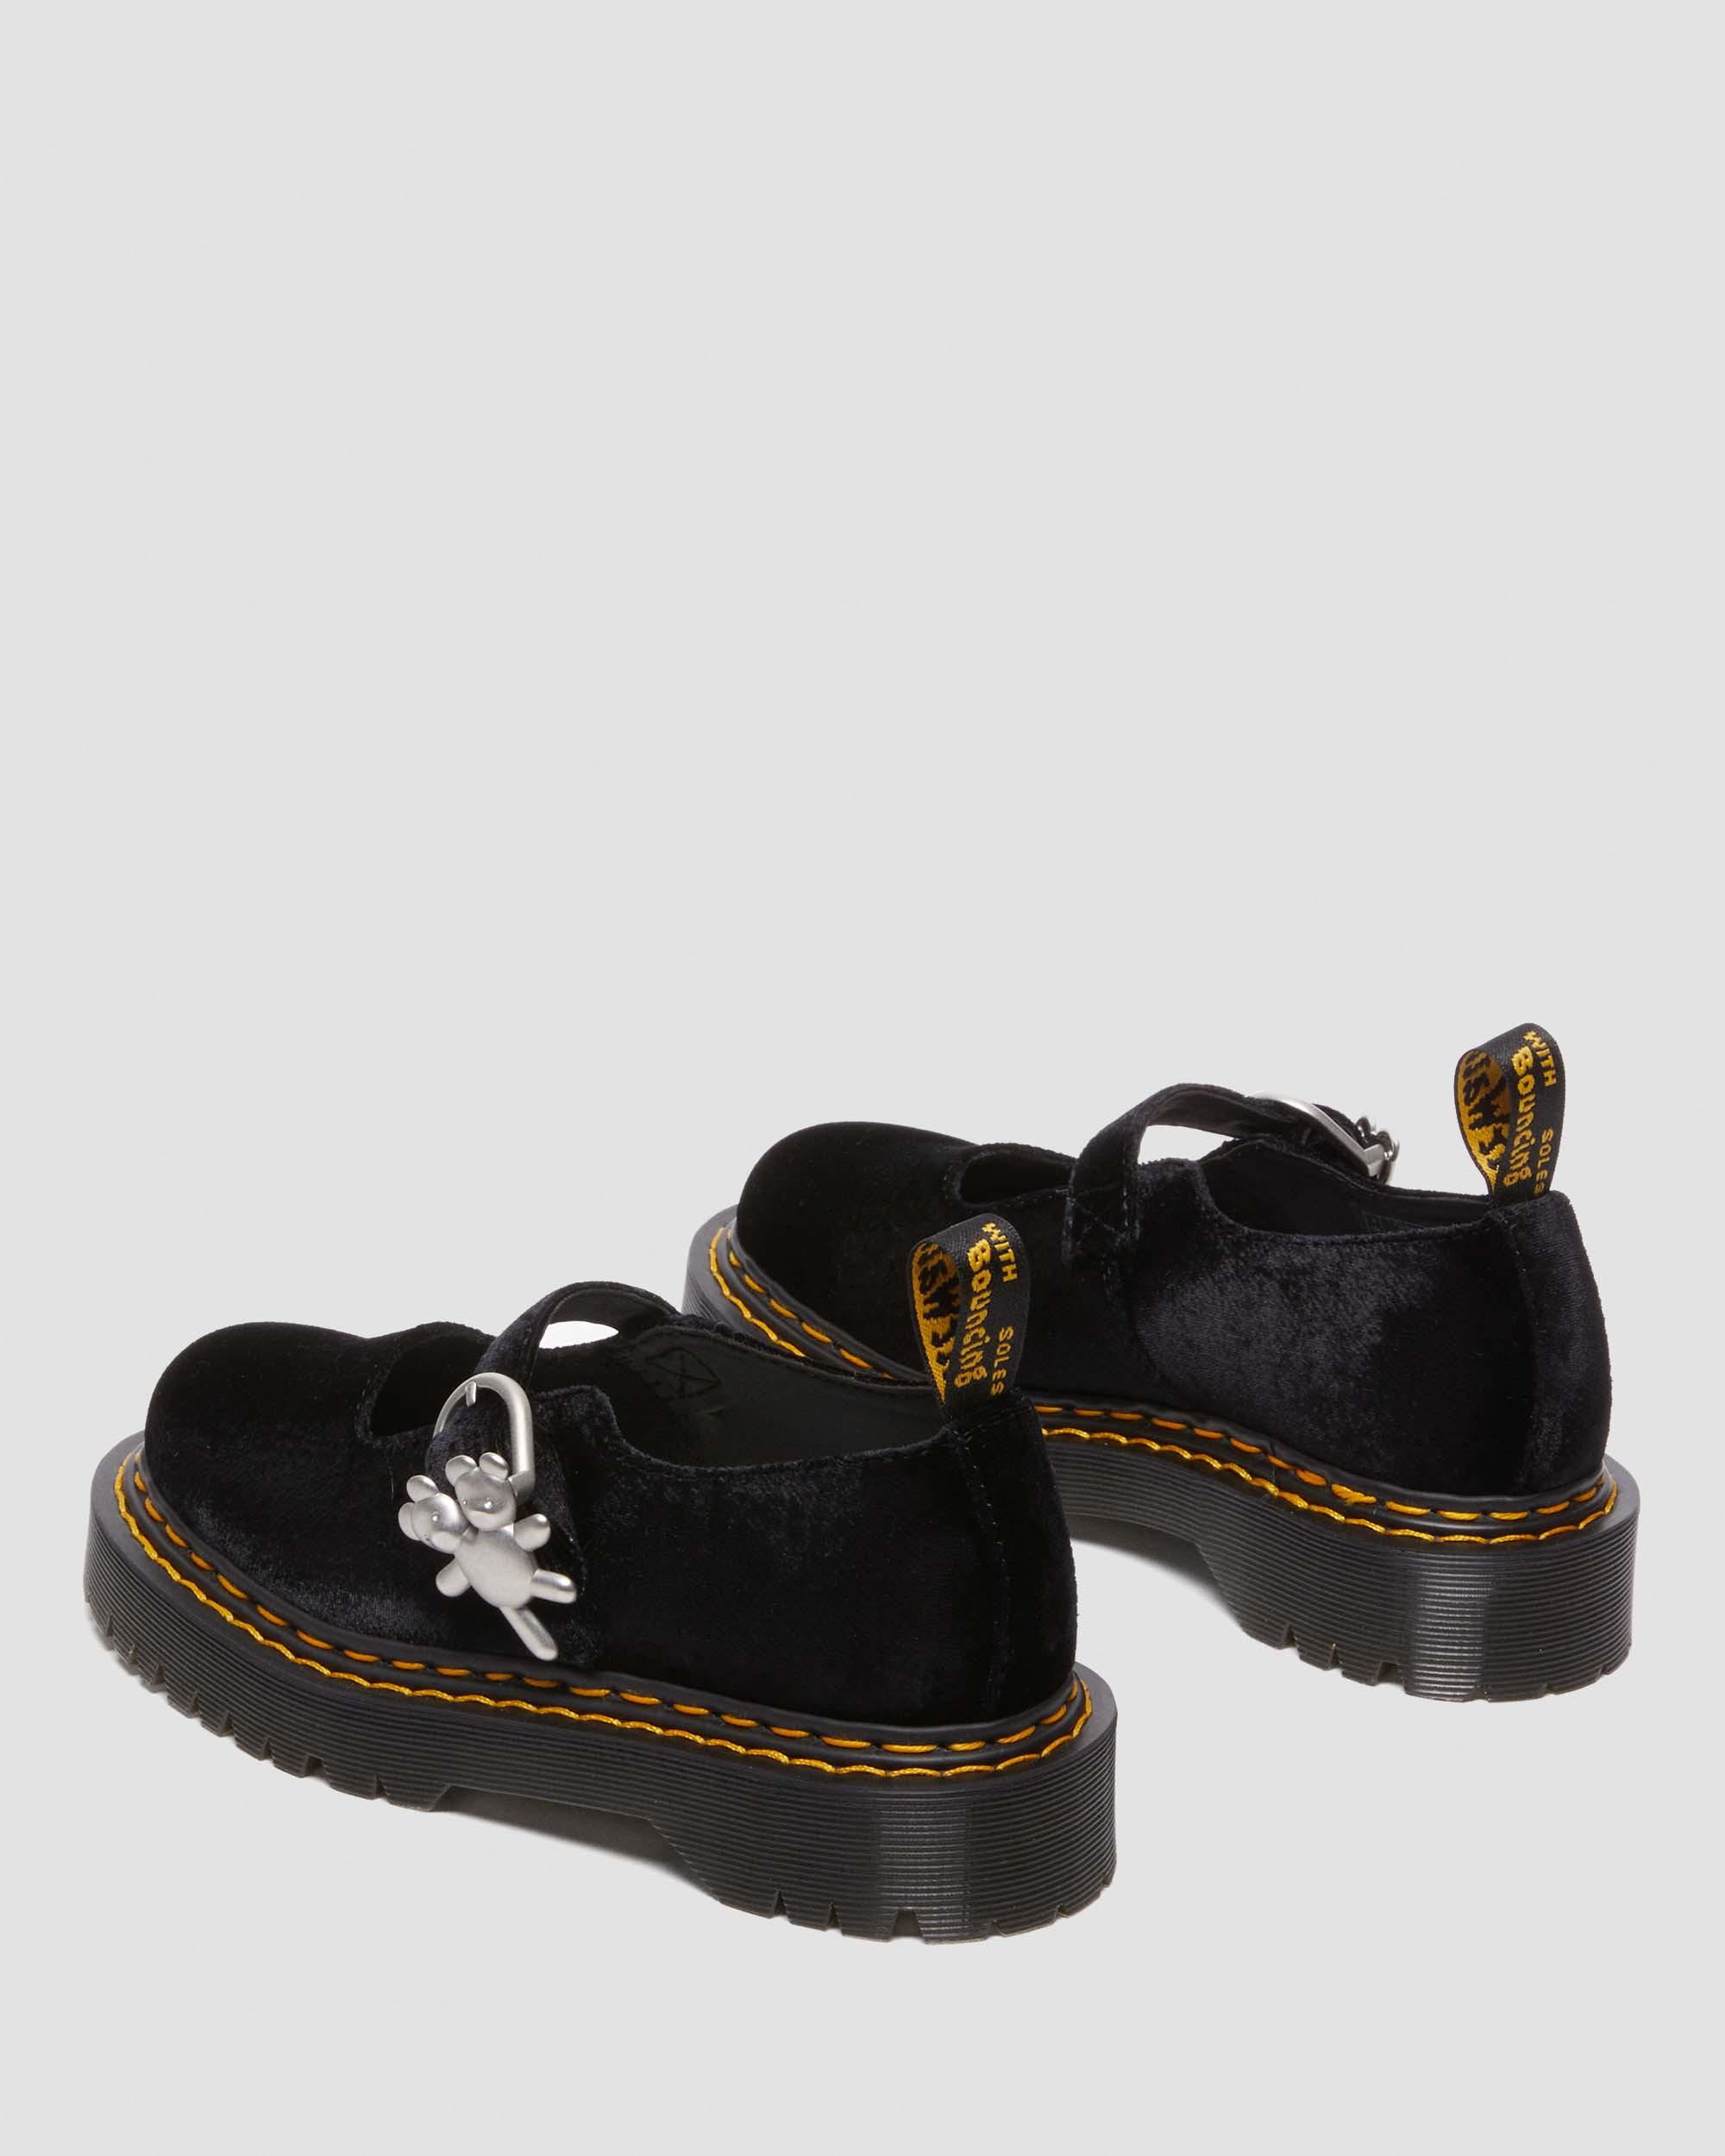 Addina Heaven by Marc Jacobs Velvet Shoes in Black